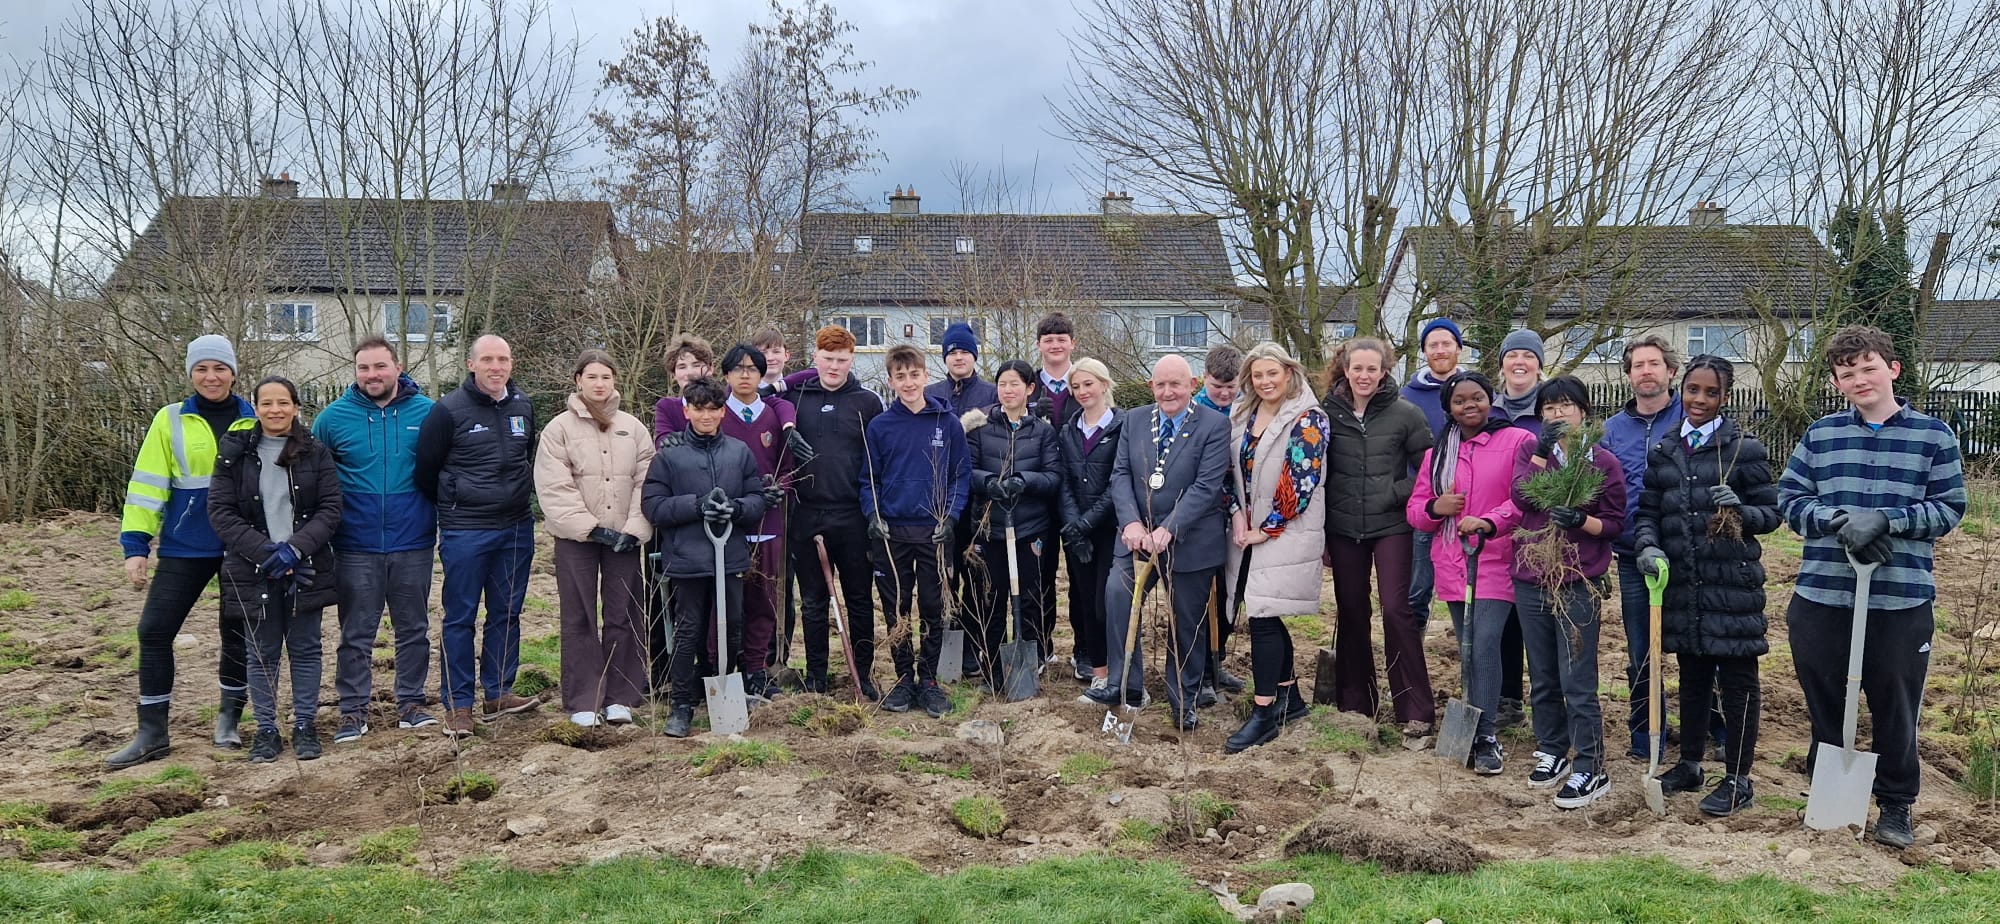 Thomond Community College Living Woodlands support saw students plant native Irish trees at the beginning of the month of March